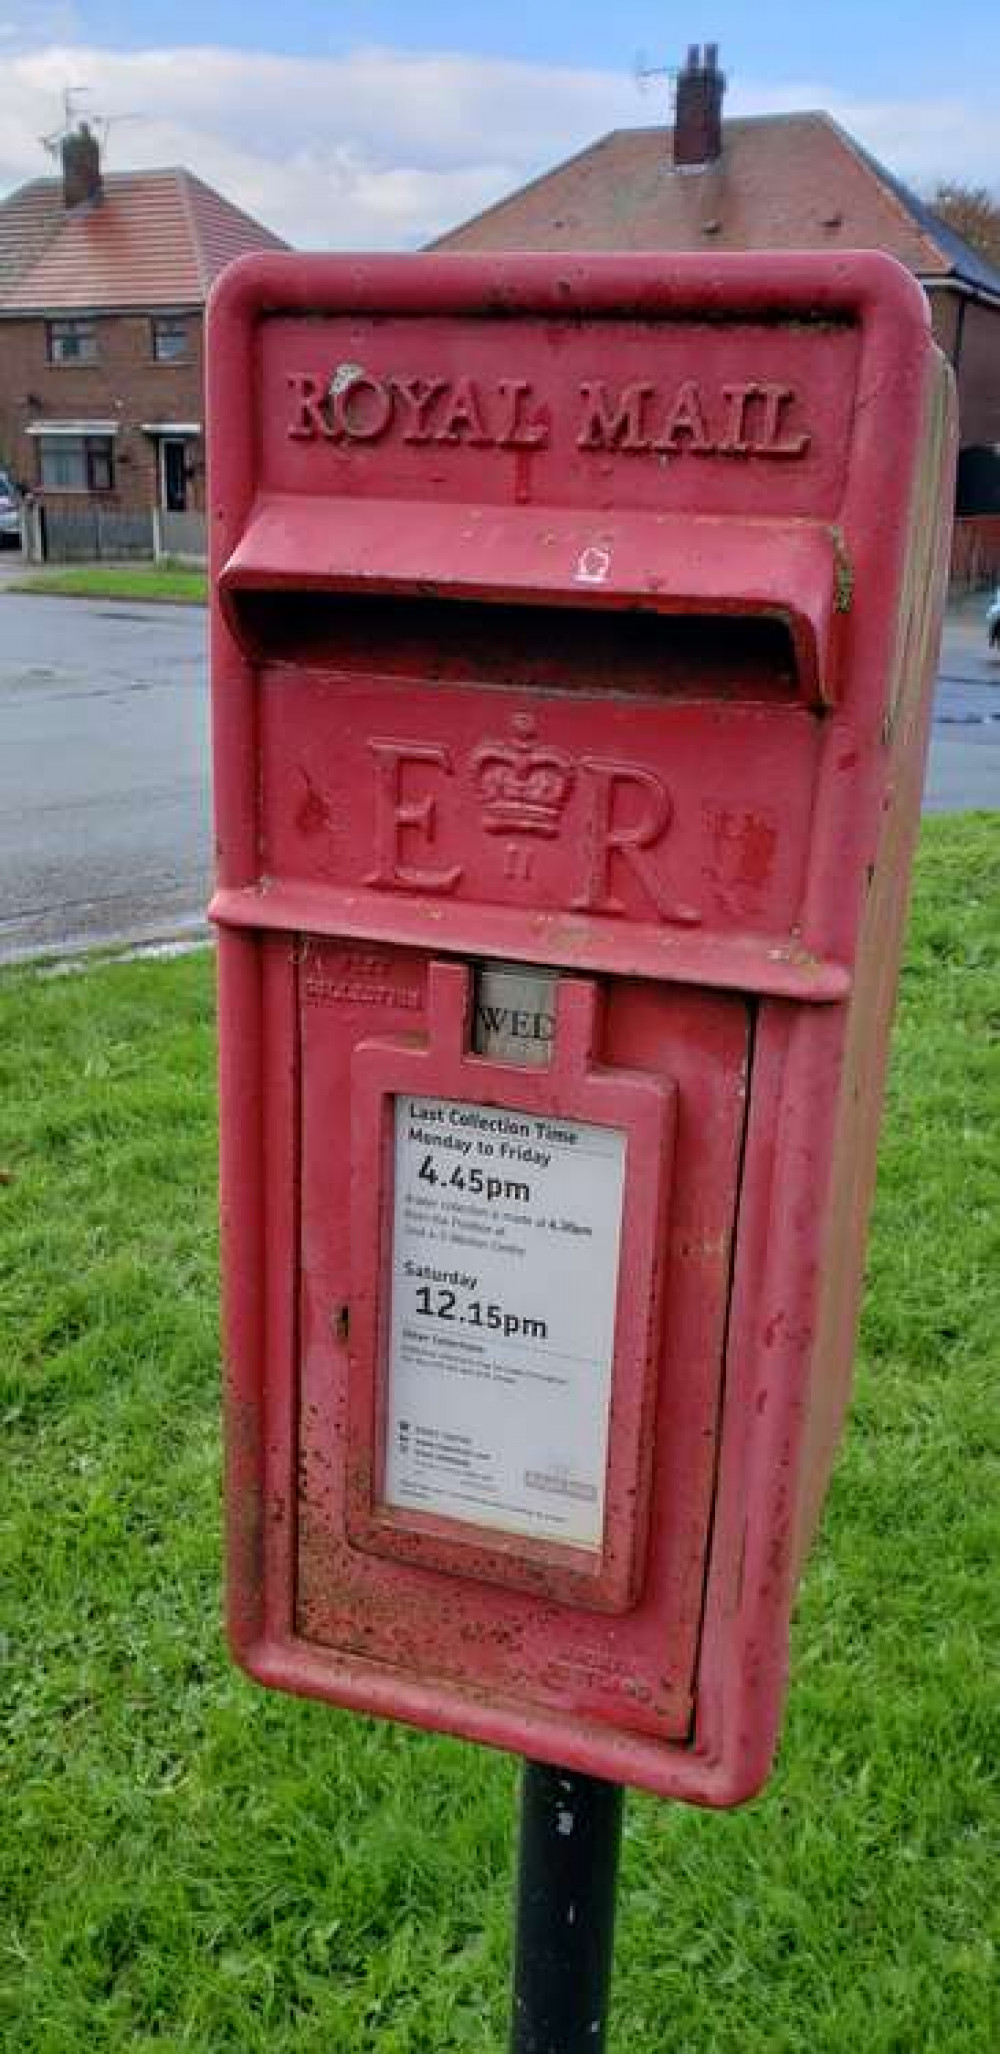 "My own experience, and that of many who have been in contact with me, is that Royal Mail is struggling to deliver even once a week," - Cllr Andrew Kolker